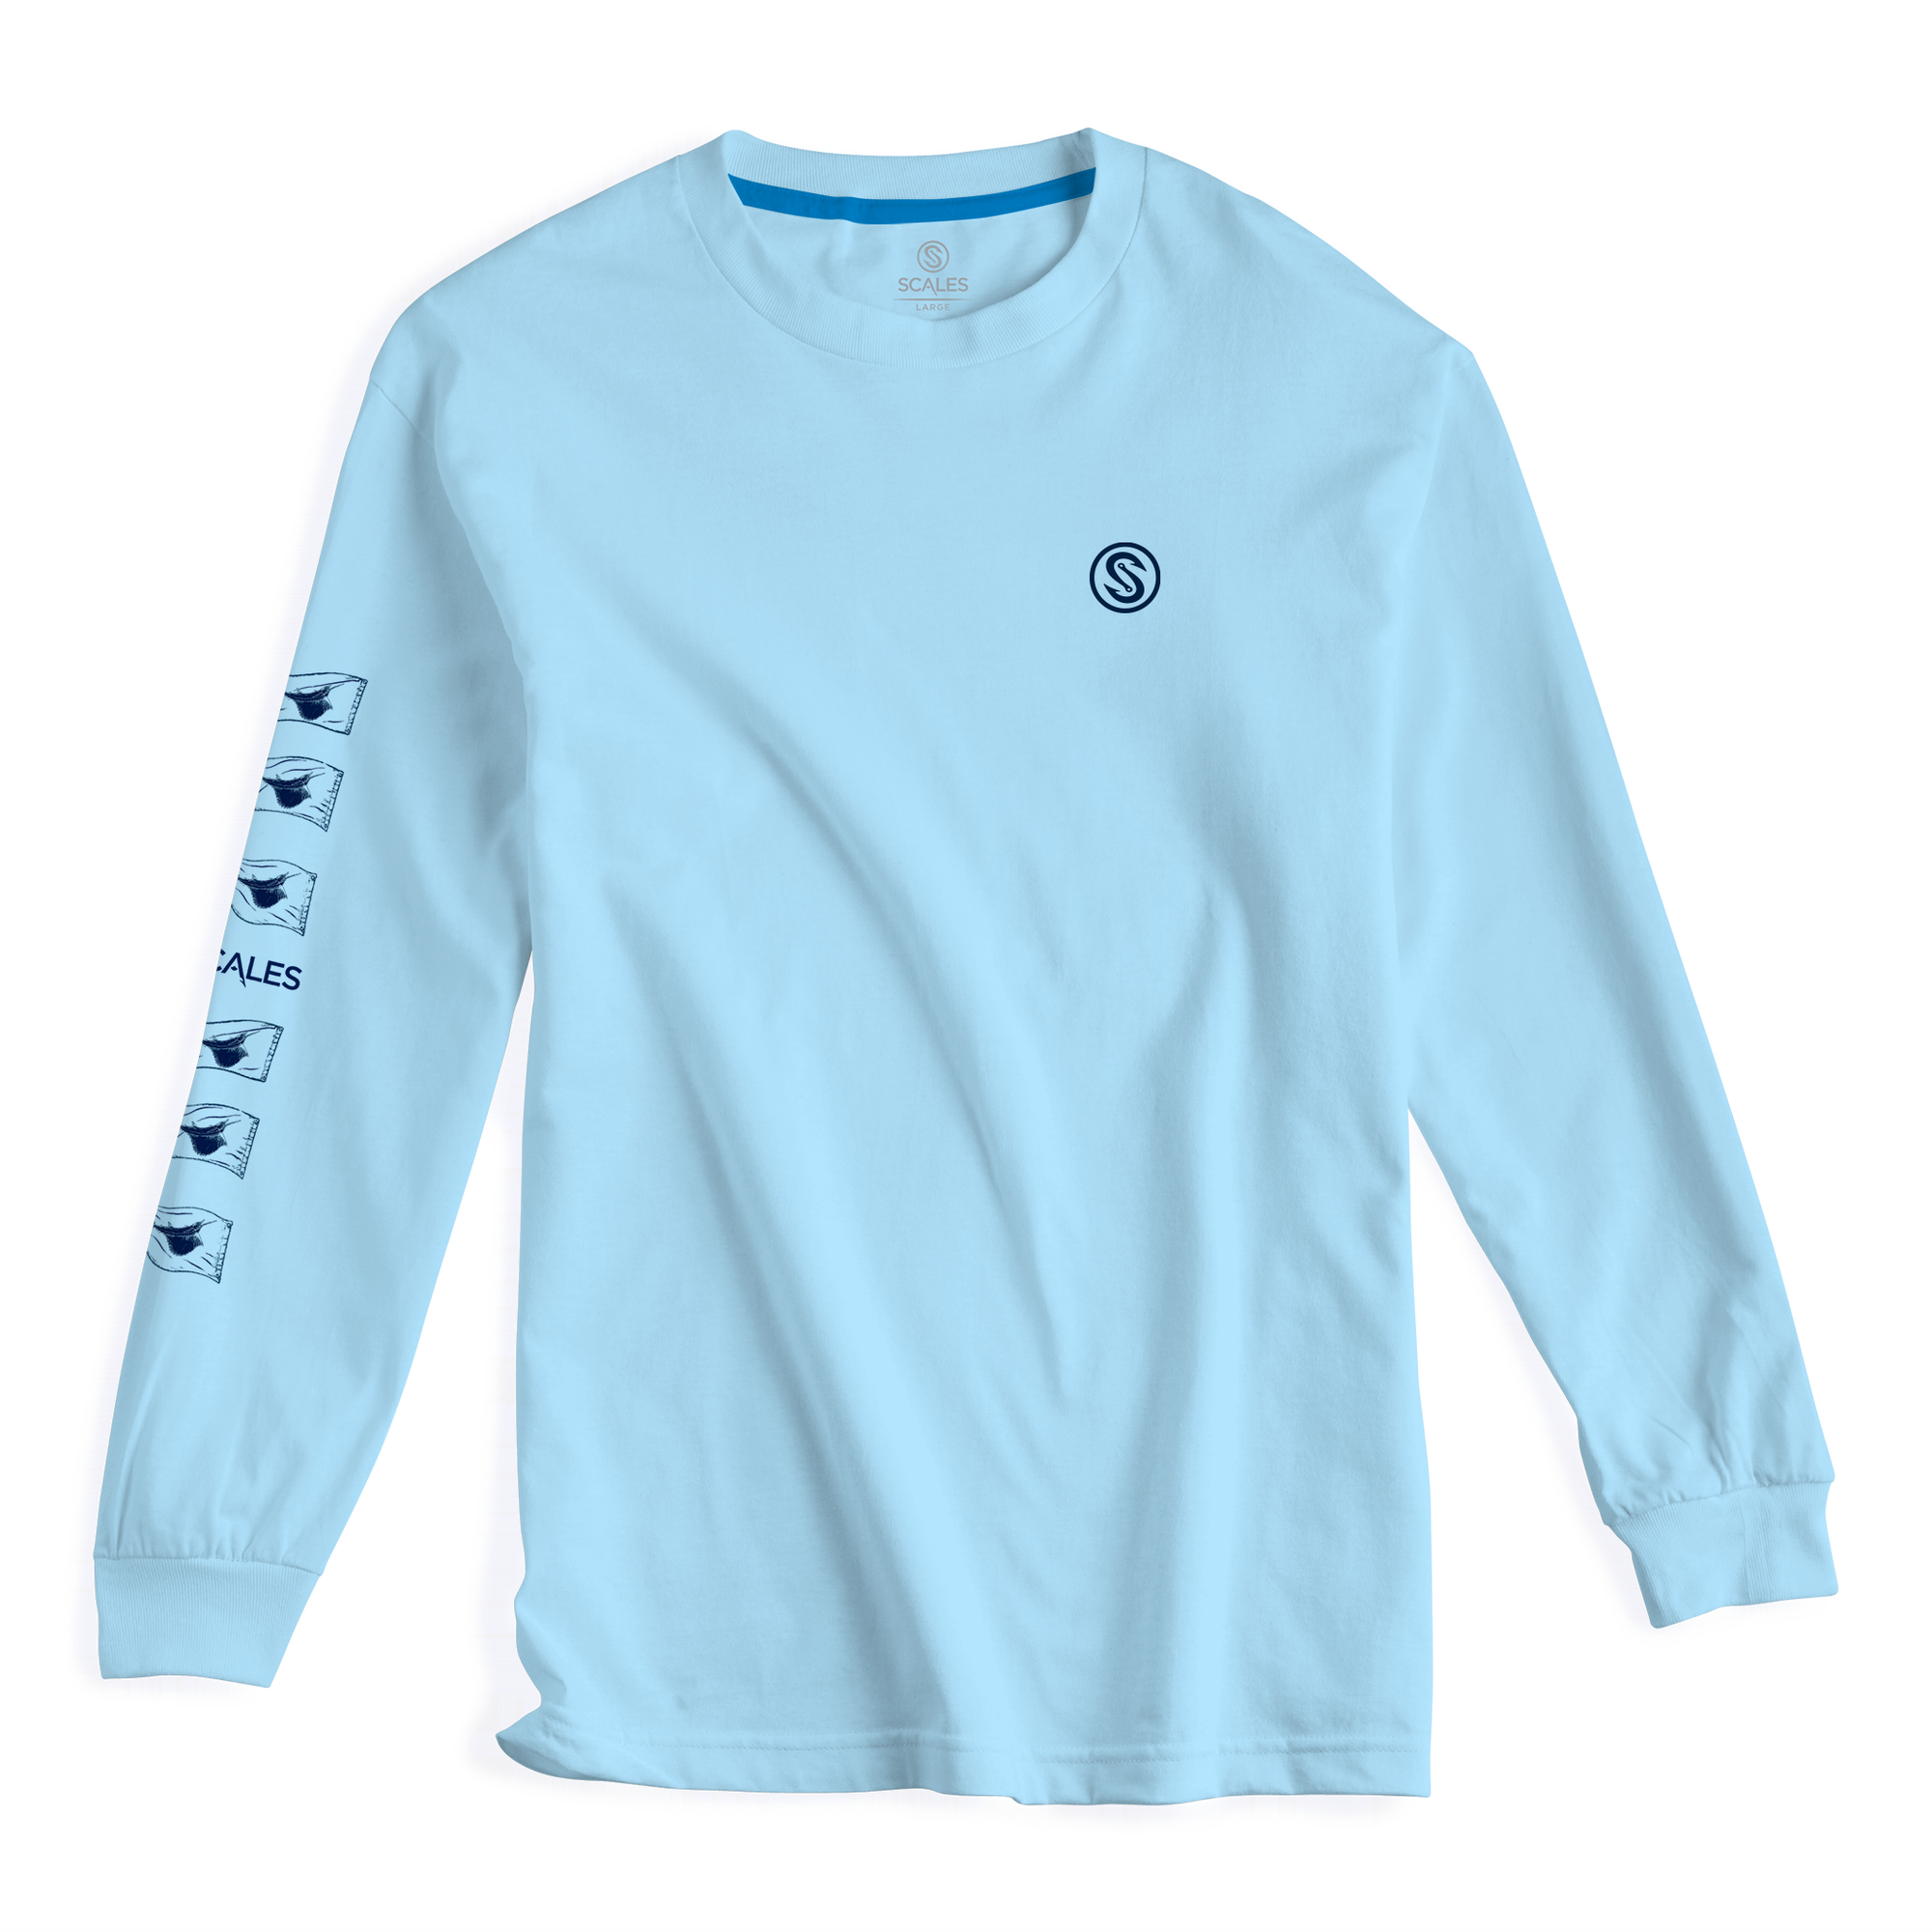 SCALES Popping Sails Premium Long Sleeve Tee